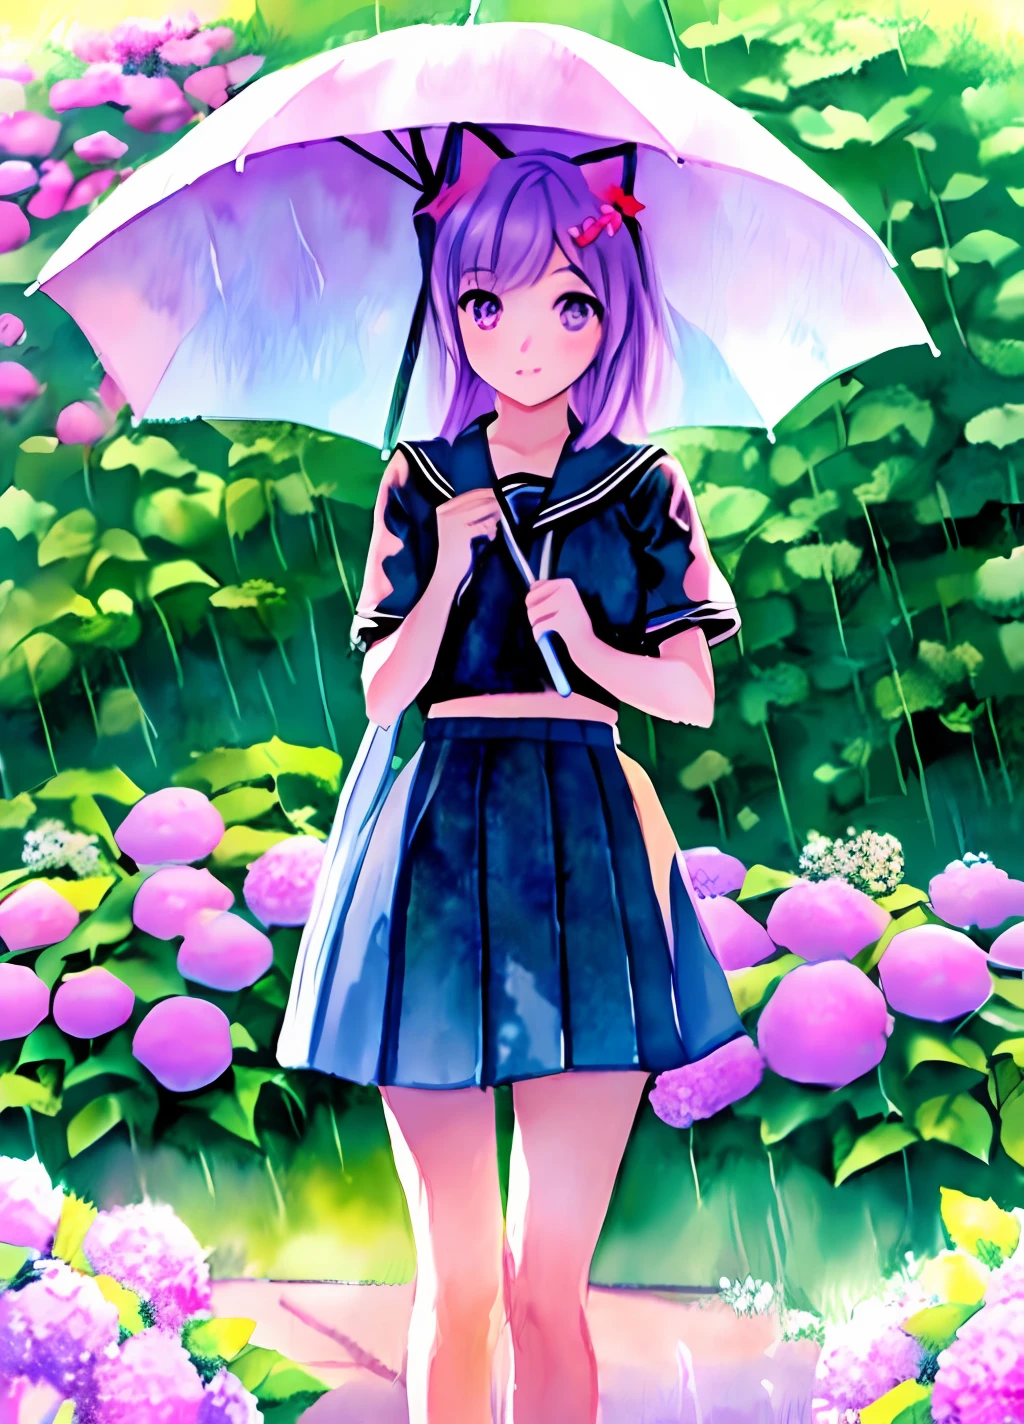 A girl high school student with cat ears and a cute atmosphere is depicted in a watercolor painting. The painting features a rainy day, a colorful umbrella, and a purple hydrangea. The color scheme is pastel.((seifuku))